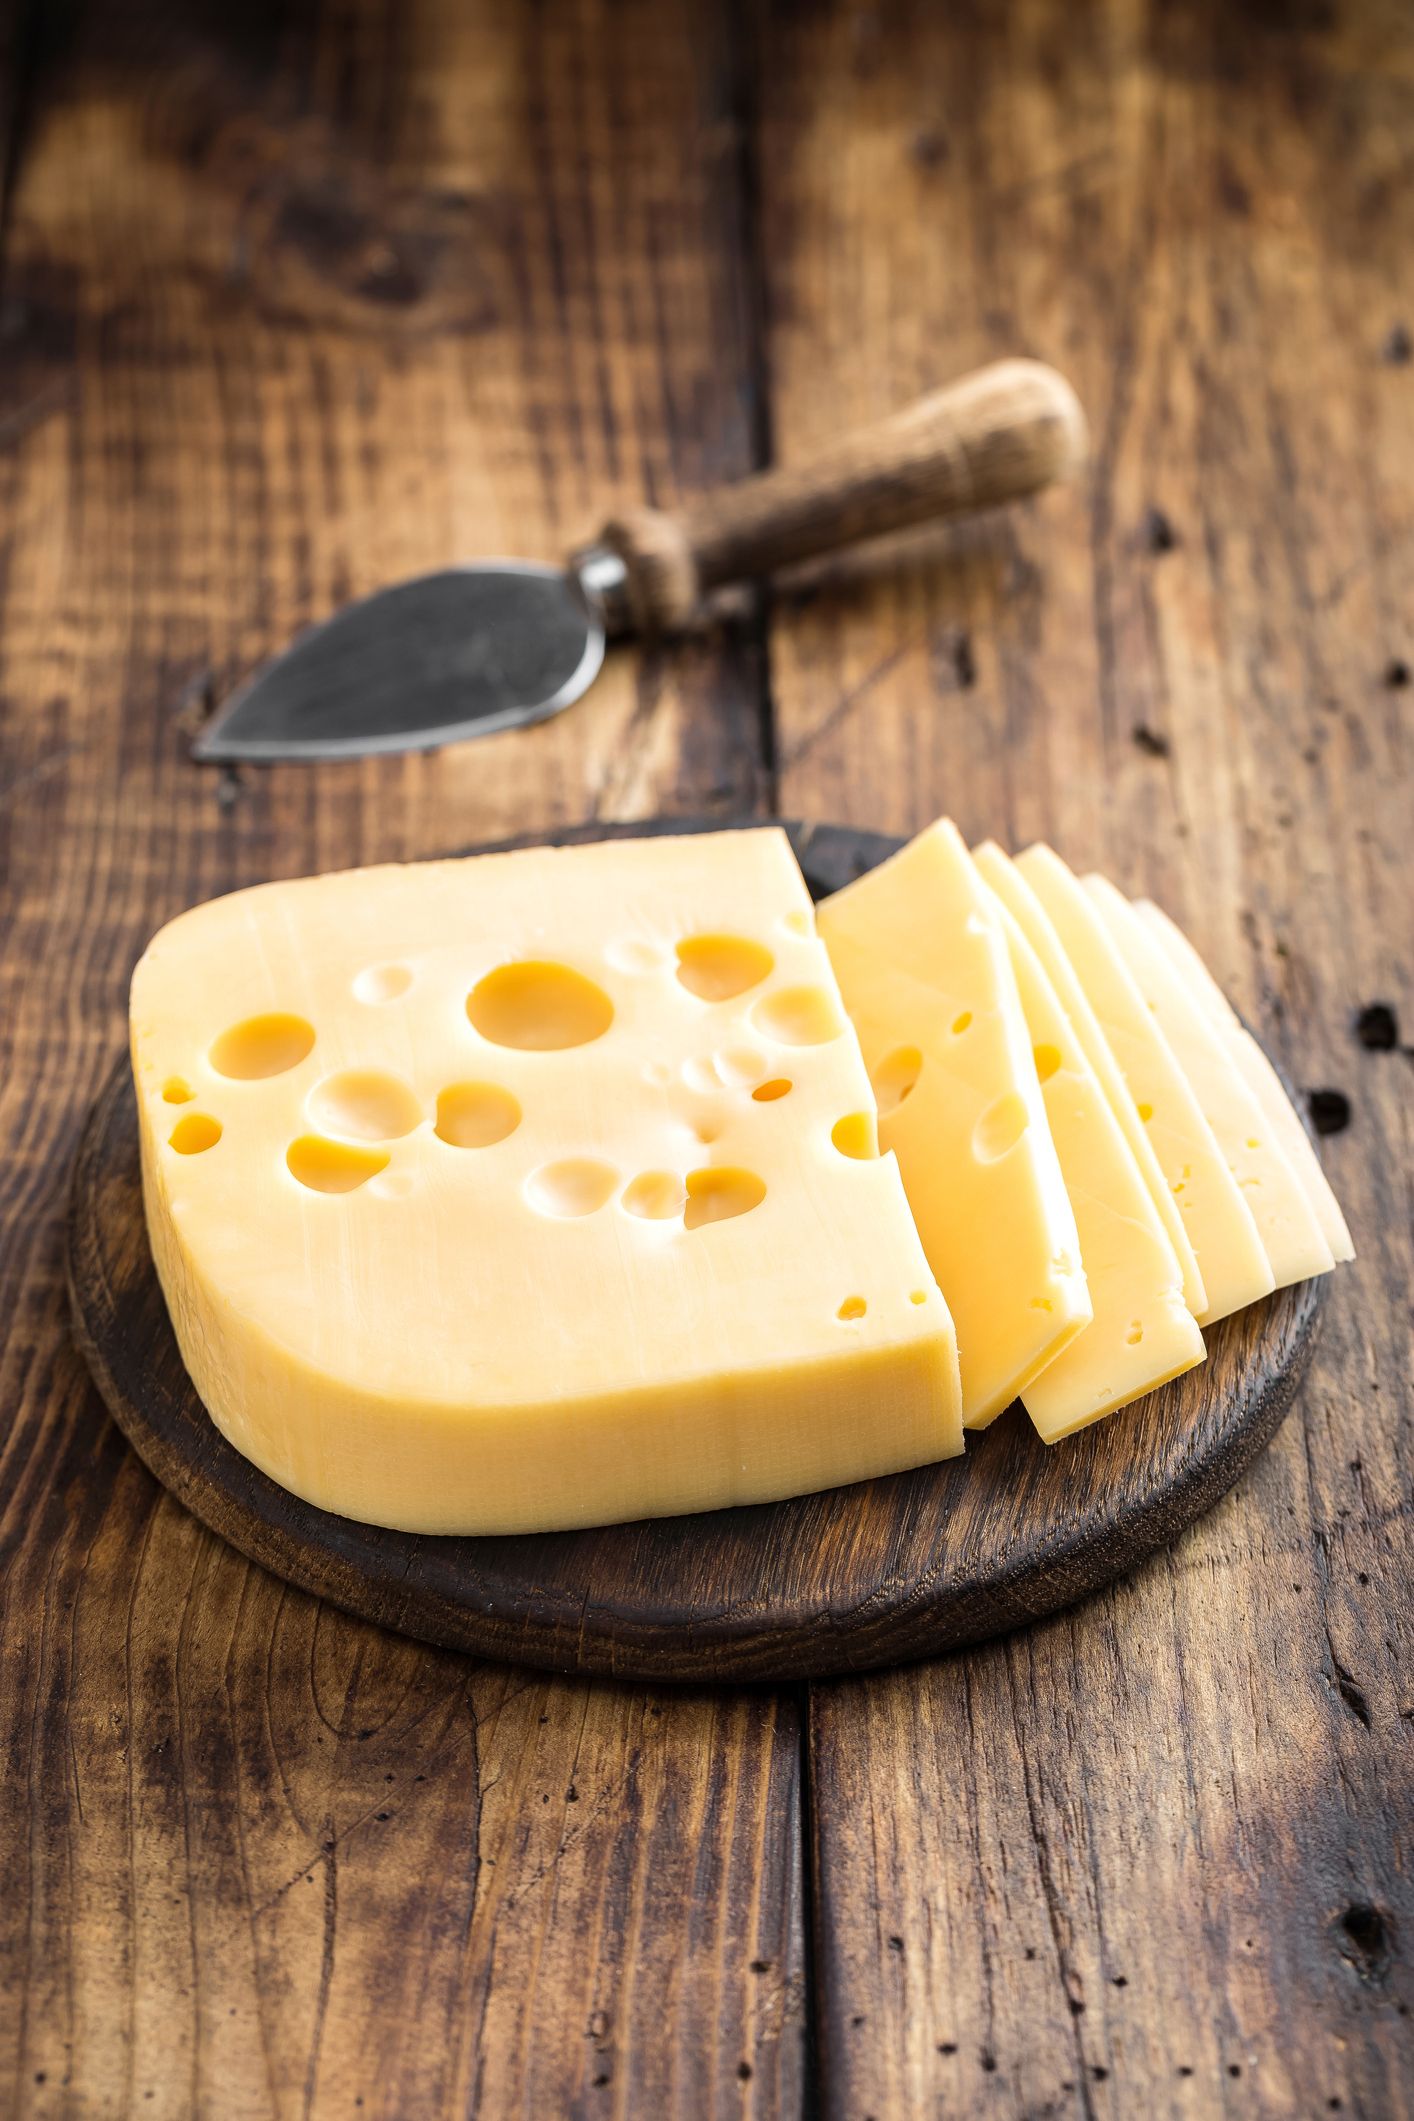 The Healthiest Cheese Choices: Cheese Health Benefits